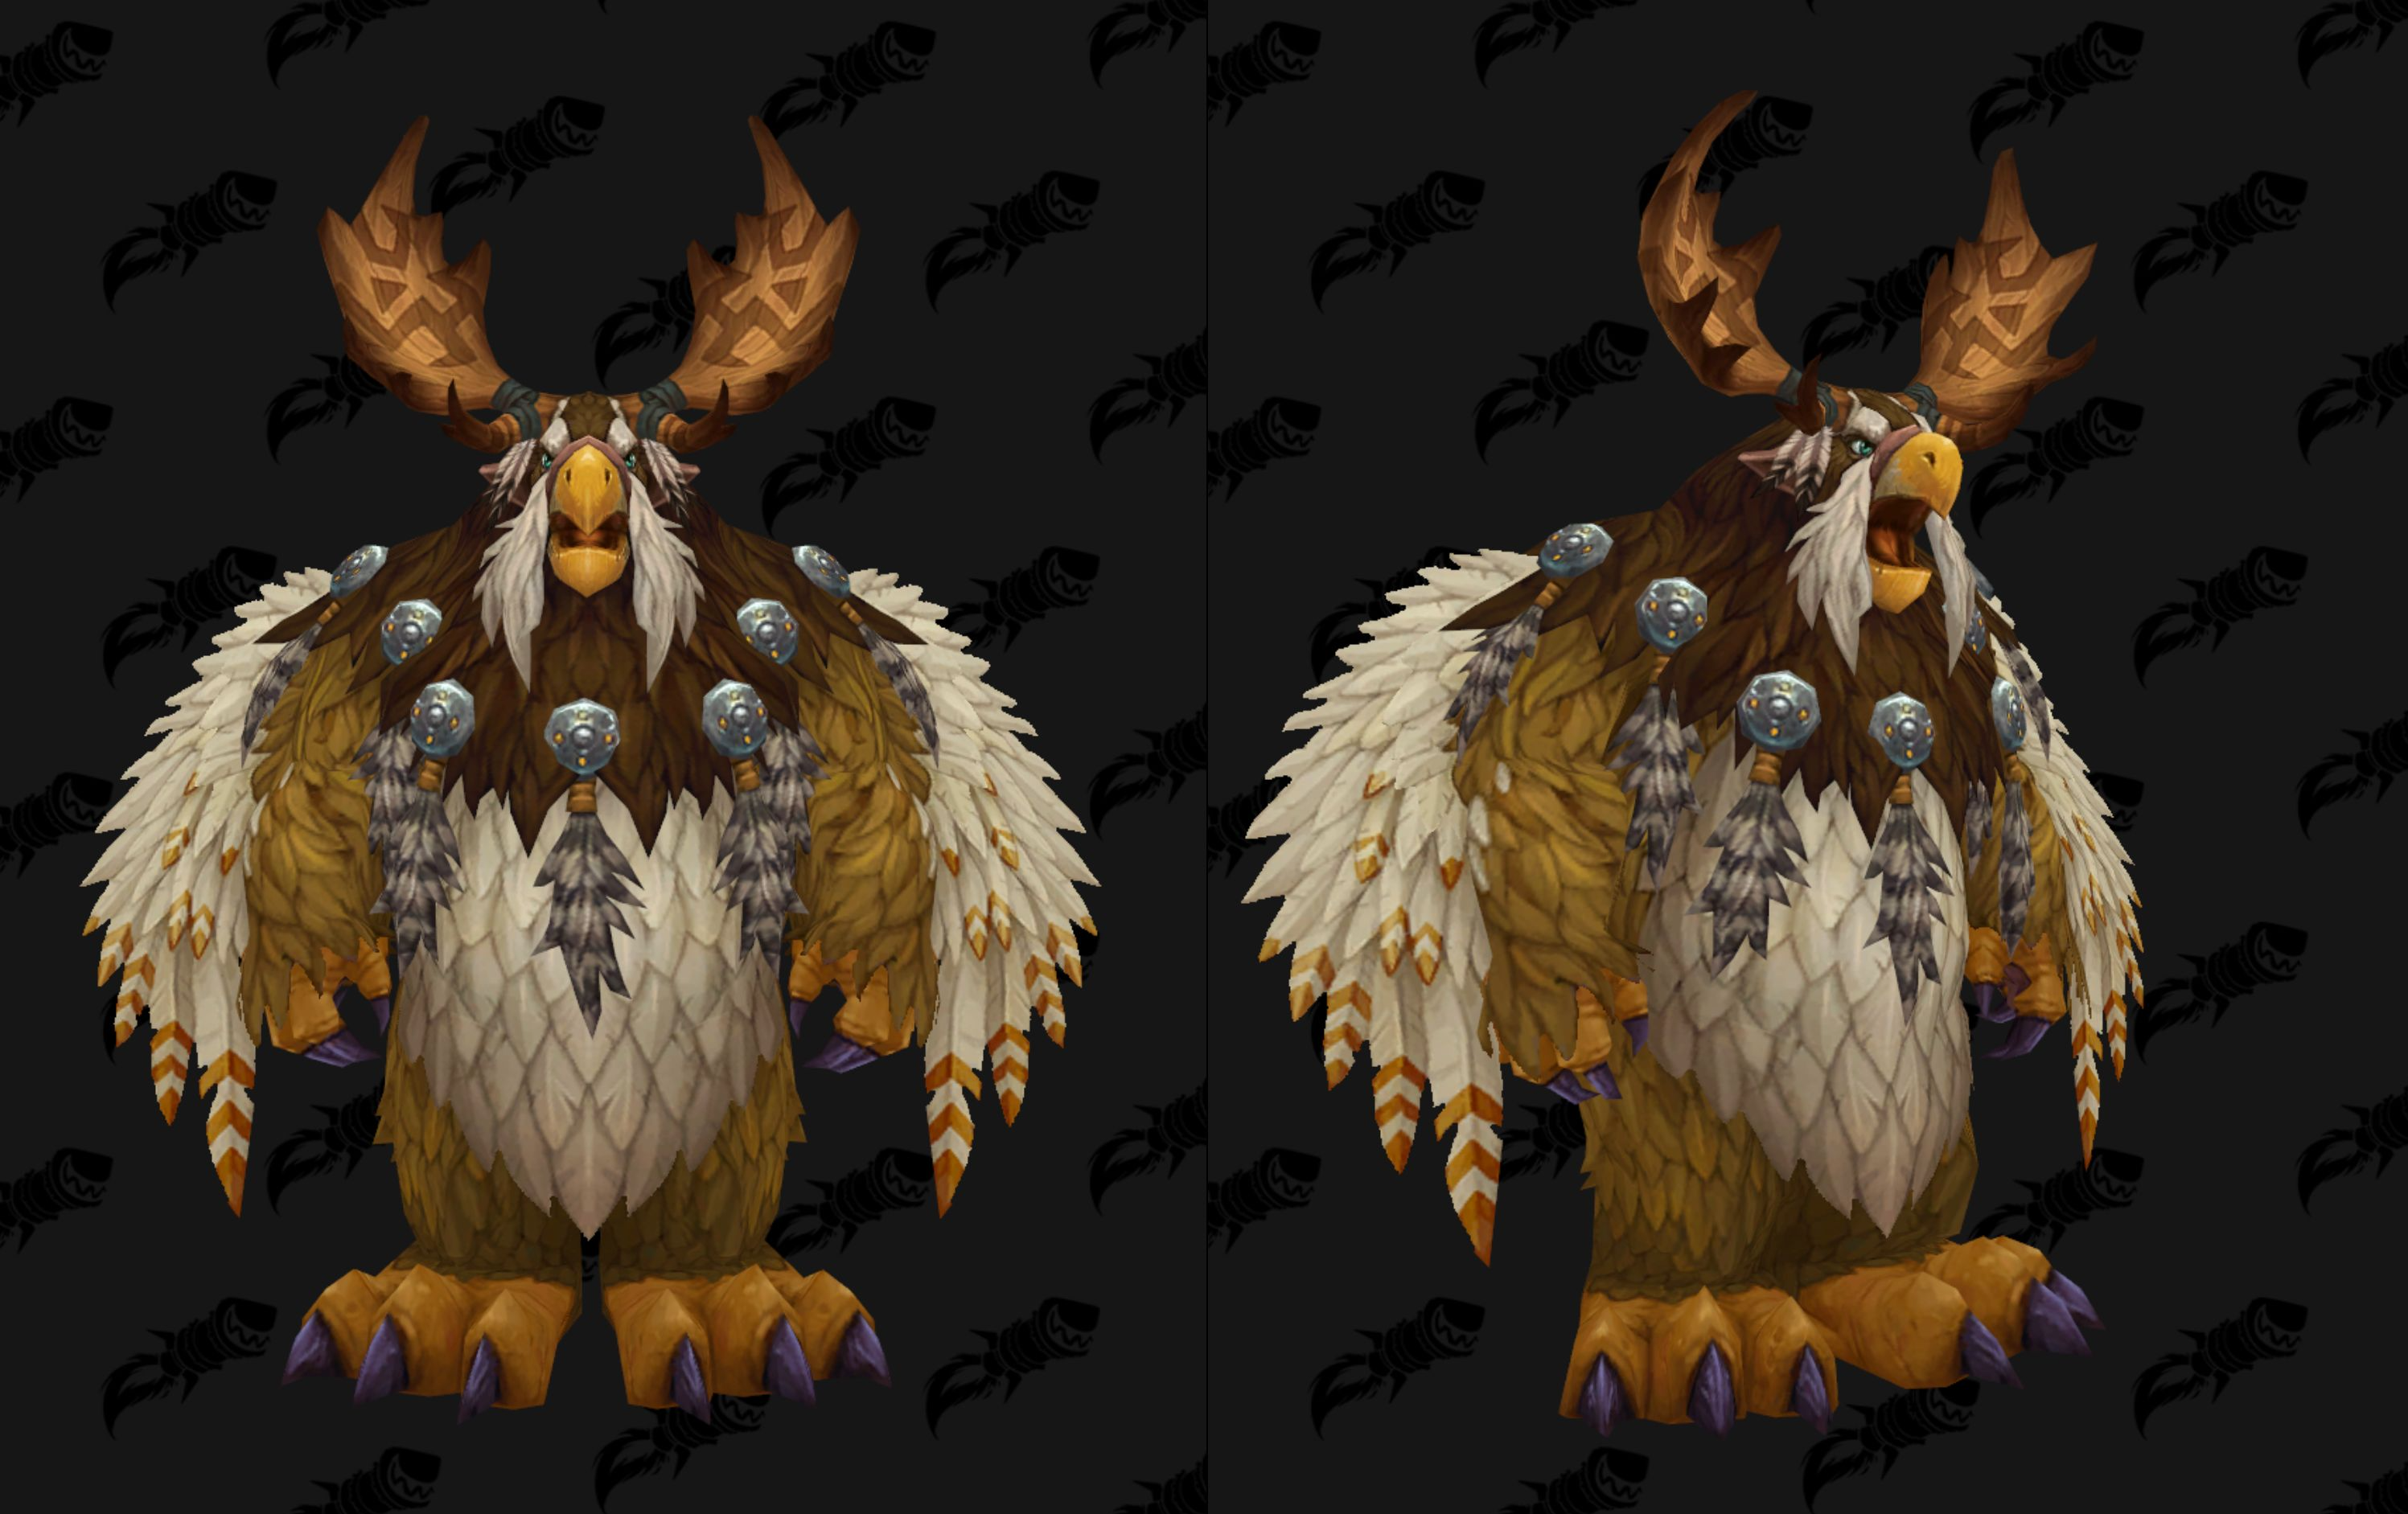 patch-8-1-ptr-27826-new-druid-form-models-kul-tiran-and